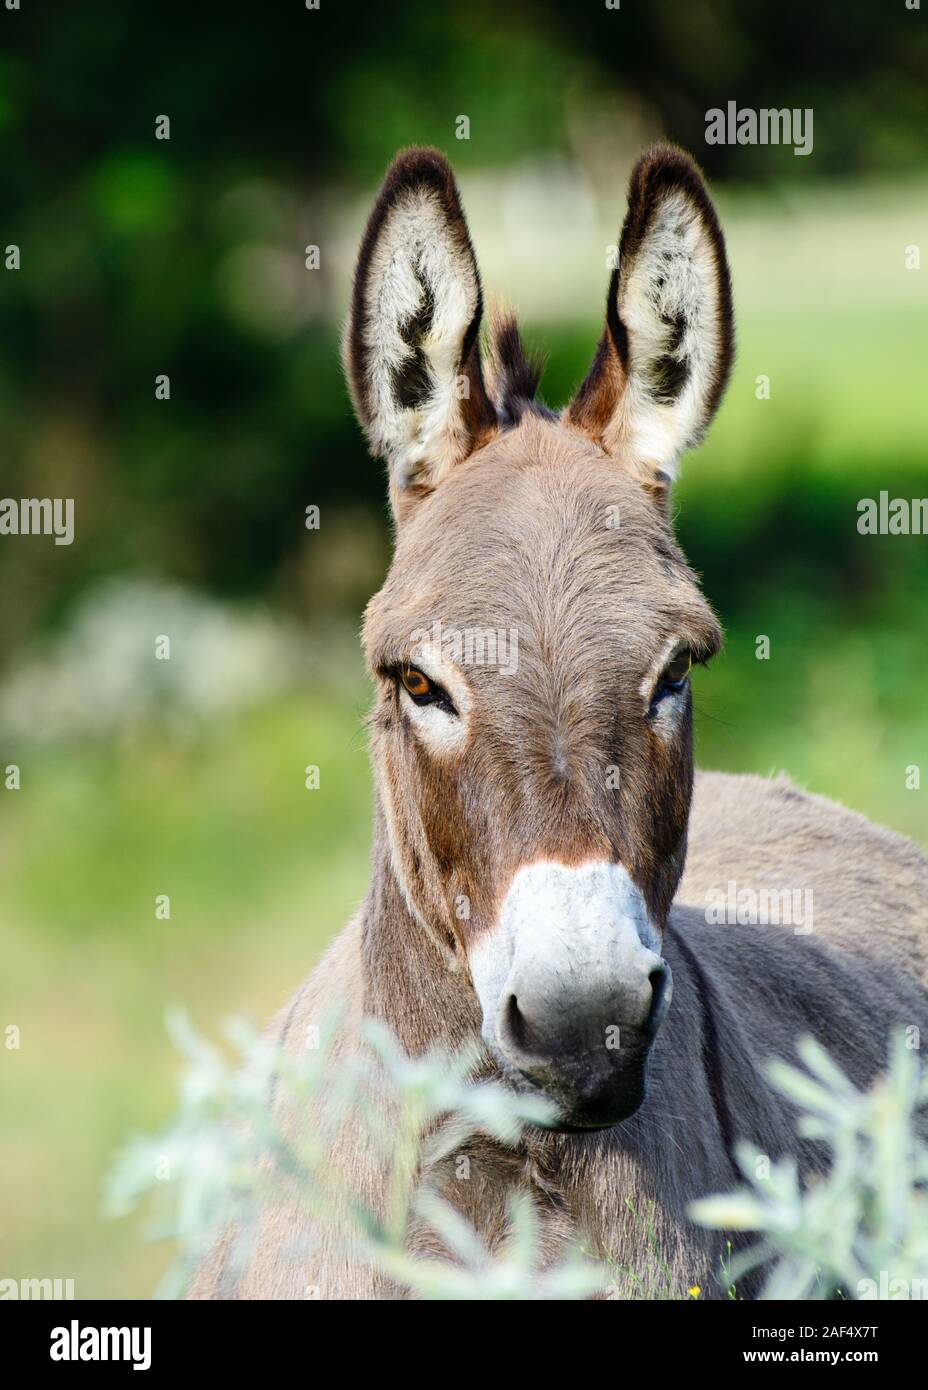 Donkey or ass (Equus africanus asinus) ears straight up Stock Photo